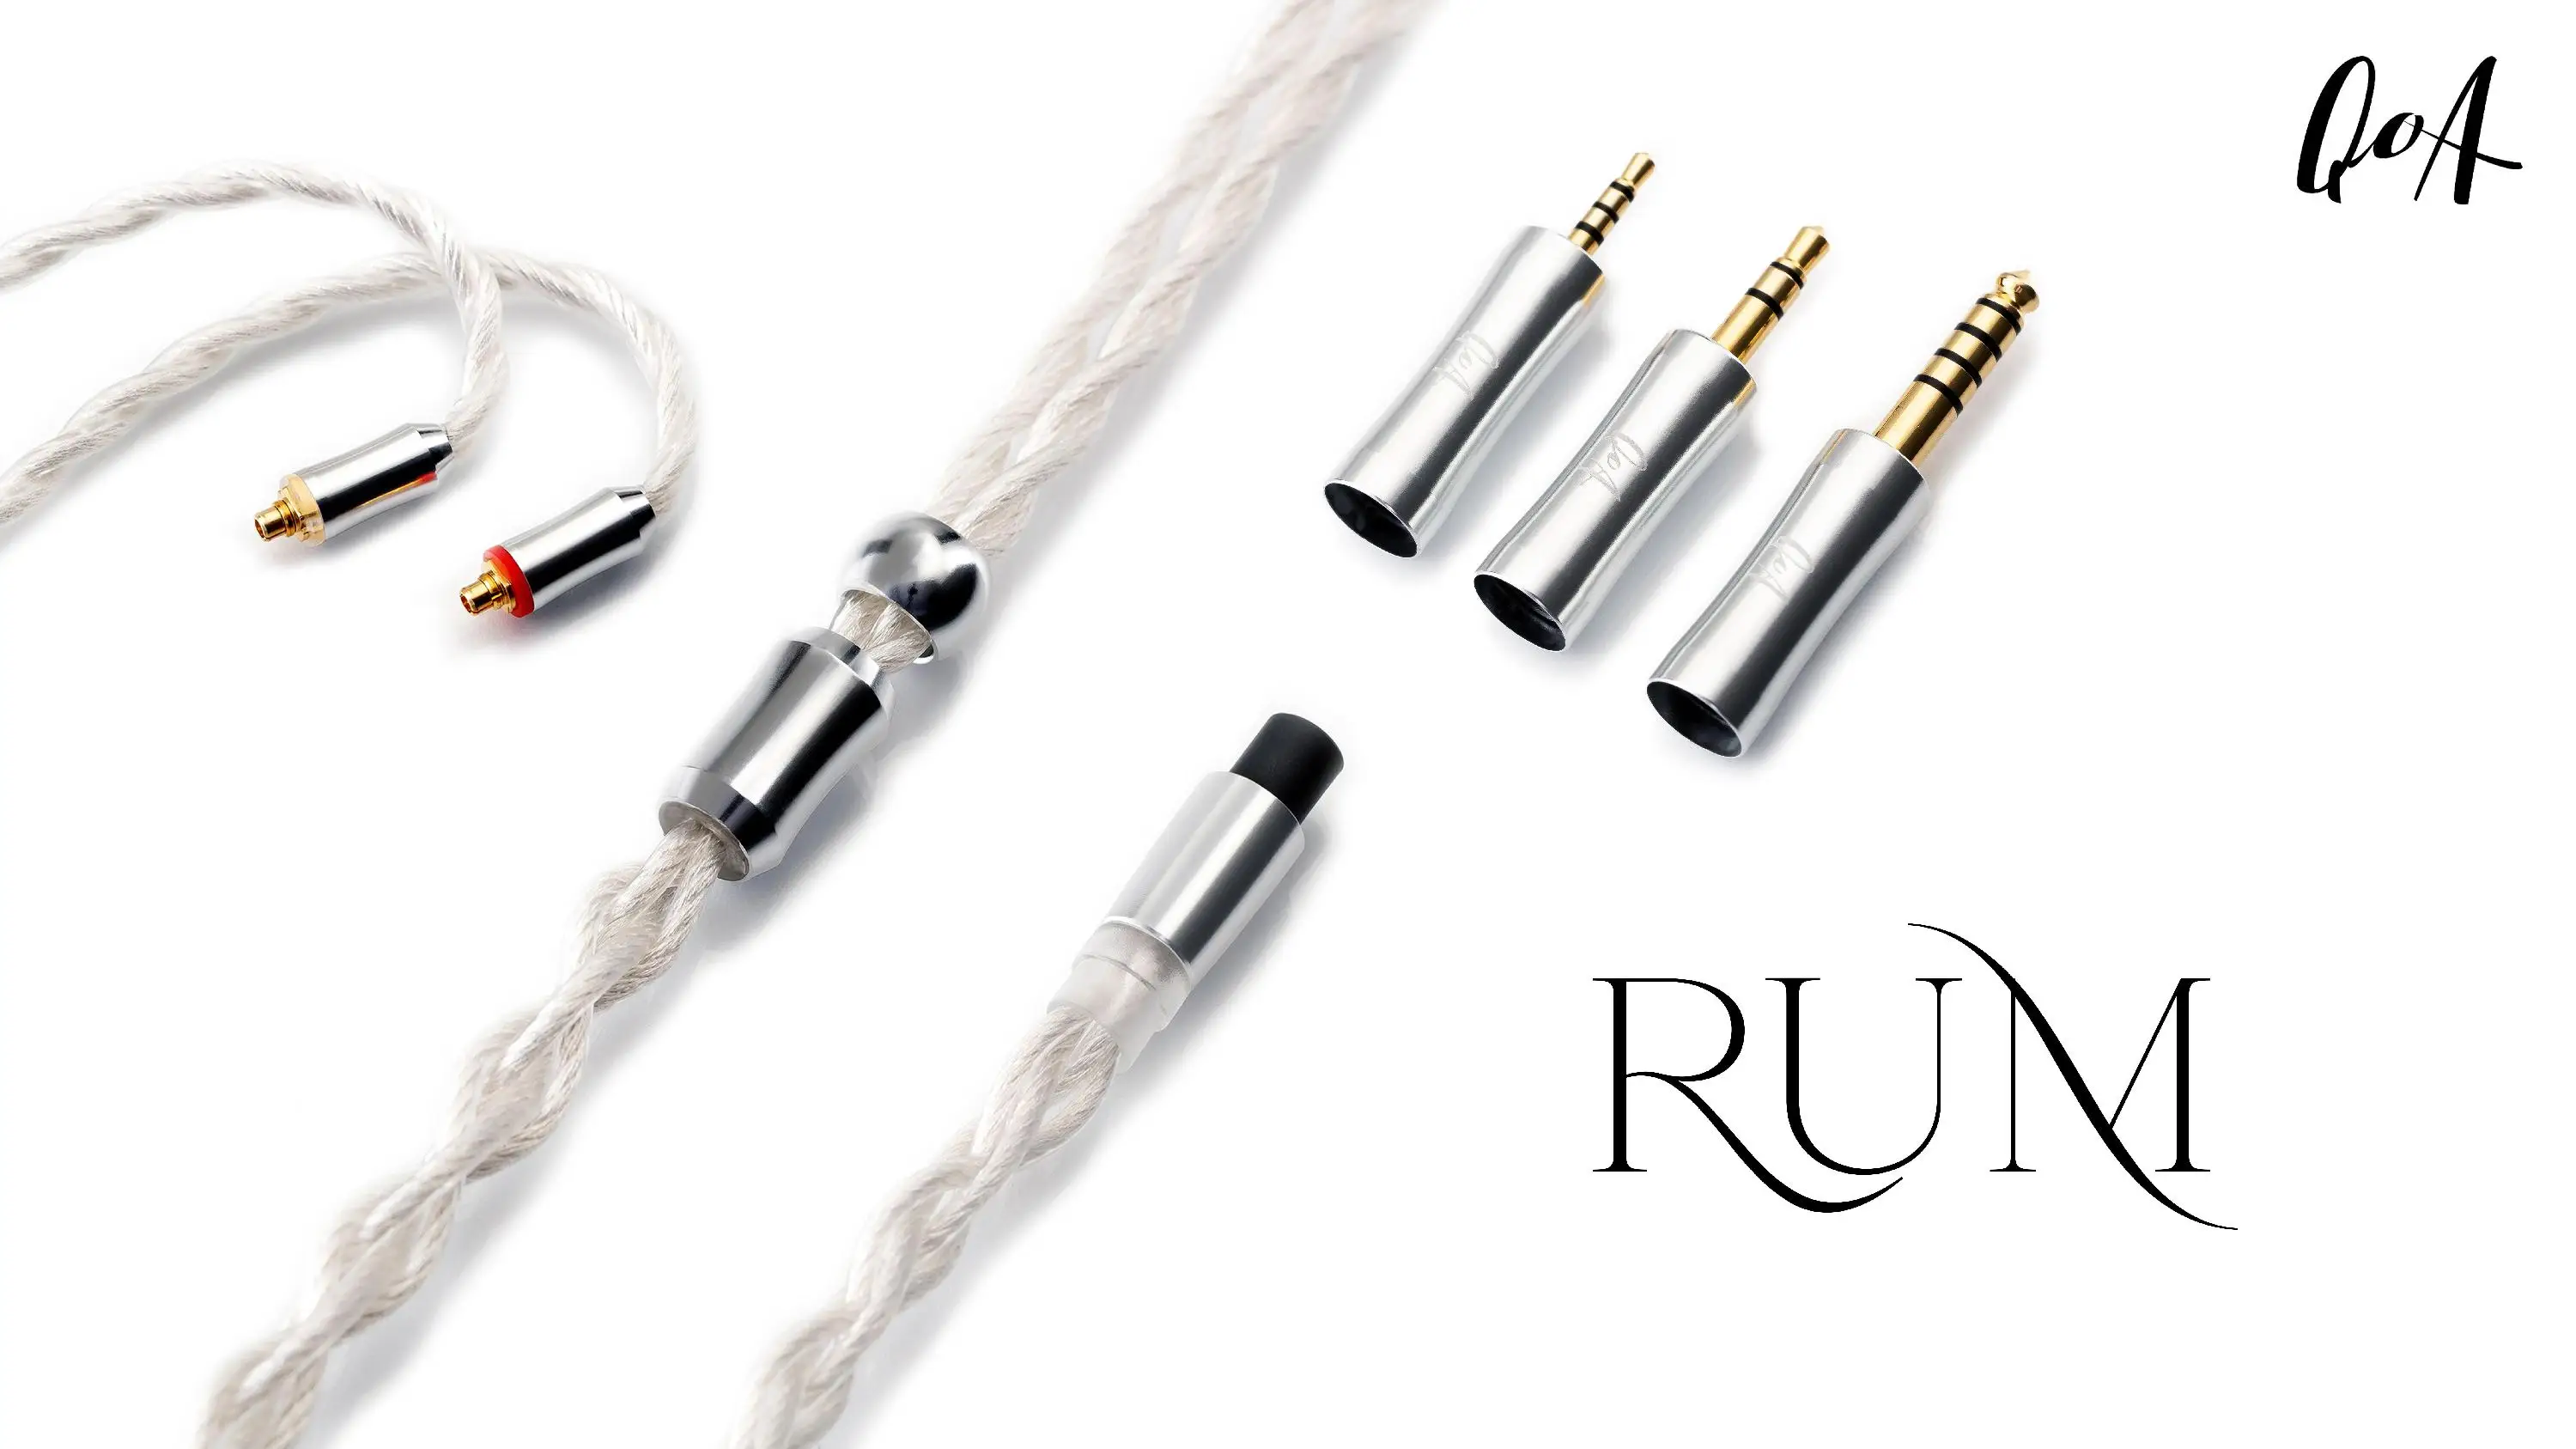 

QoA RUM Modular Upgrade Cable (2.5+3.5+4.4), 6N OCC with Silver Plated, 4 Core Cross Braided, 0.78 2pin / MMCX Connector